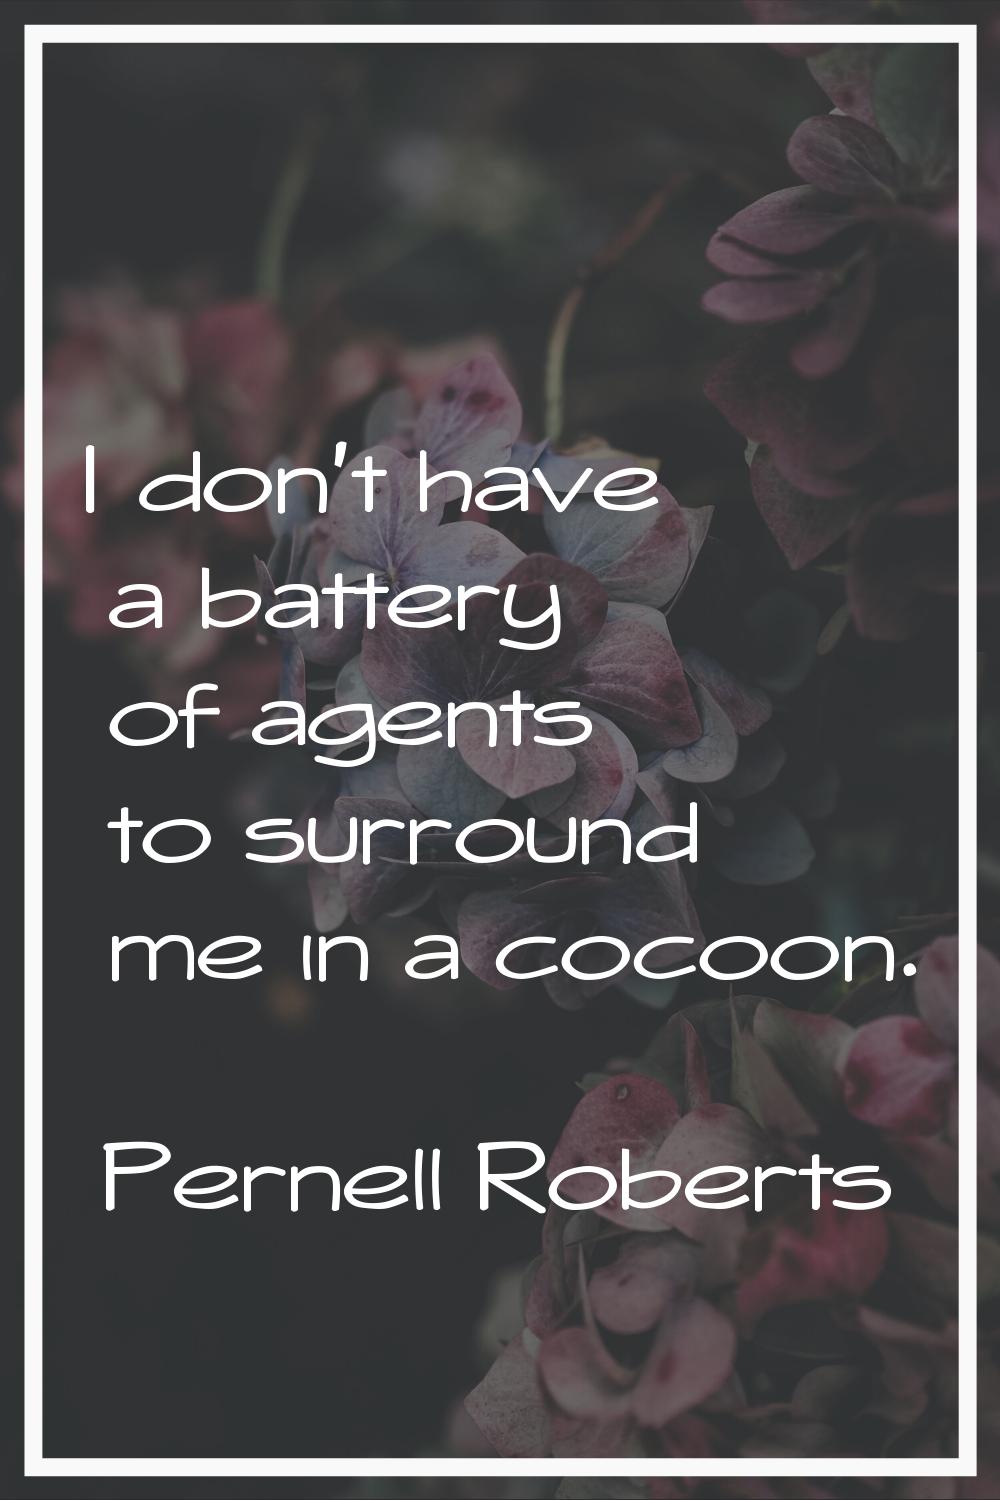 I don't have a battery of agents to surround me in a cocoon.